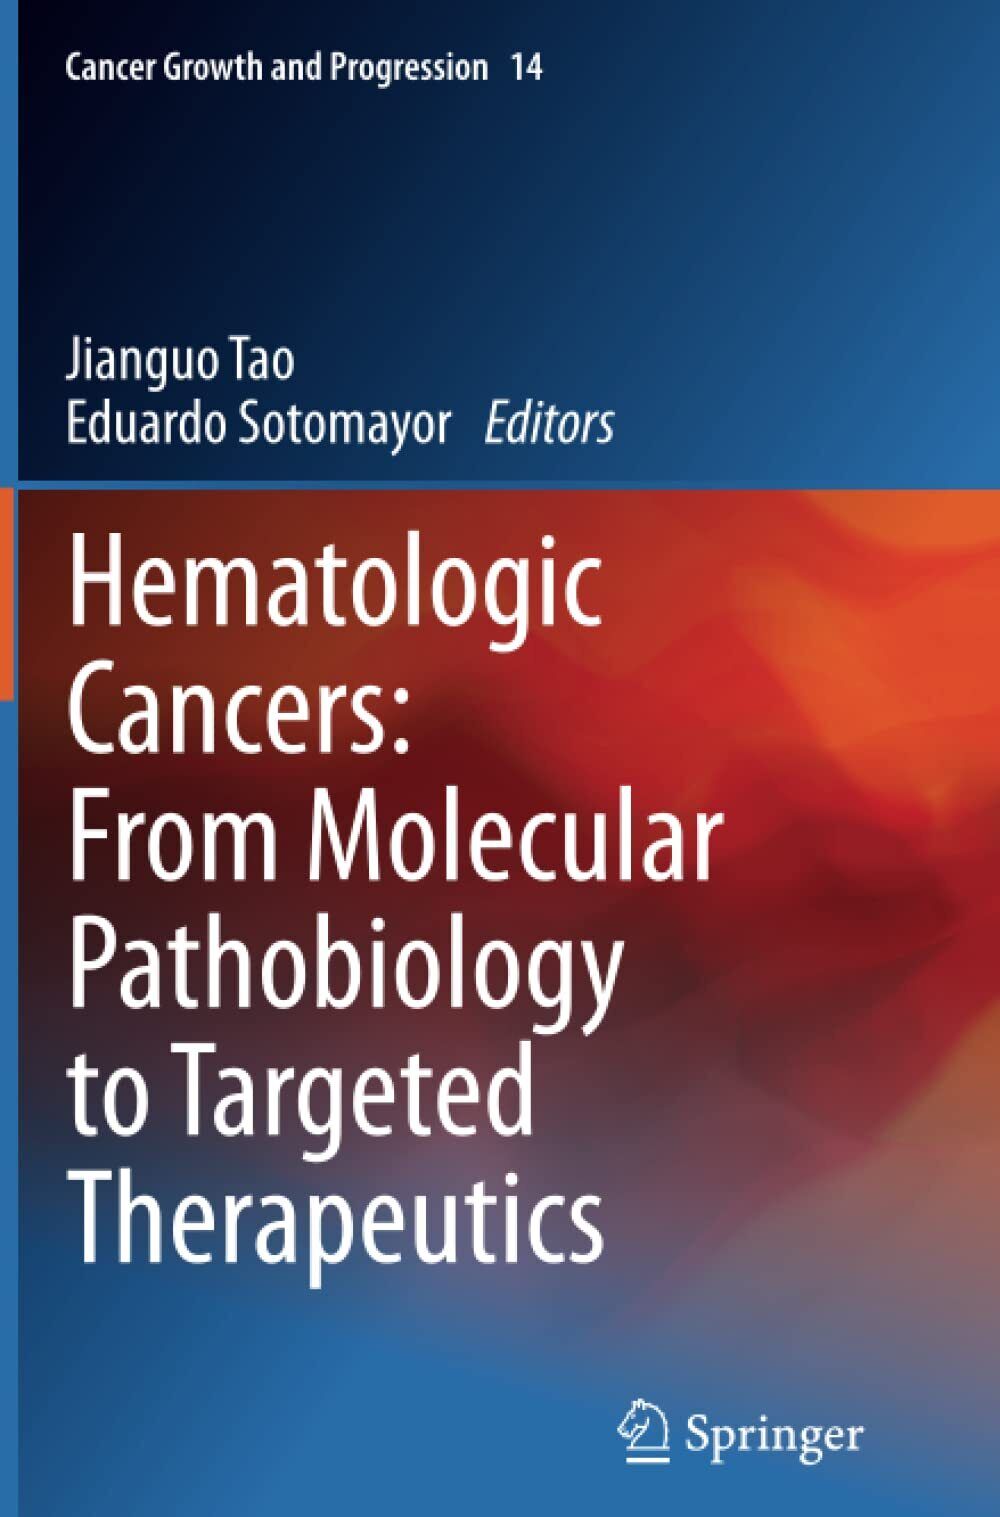 Hematologic Cancers: From Molecular Pathobiology to Targeted Therapeutics - 2014